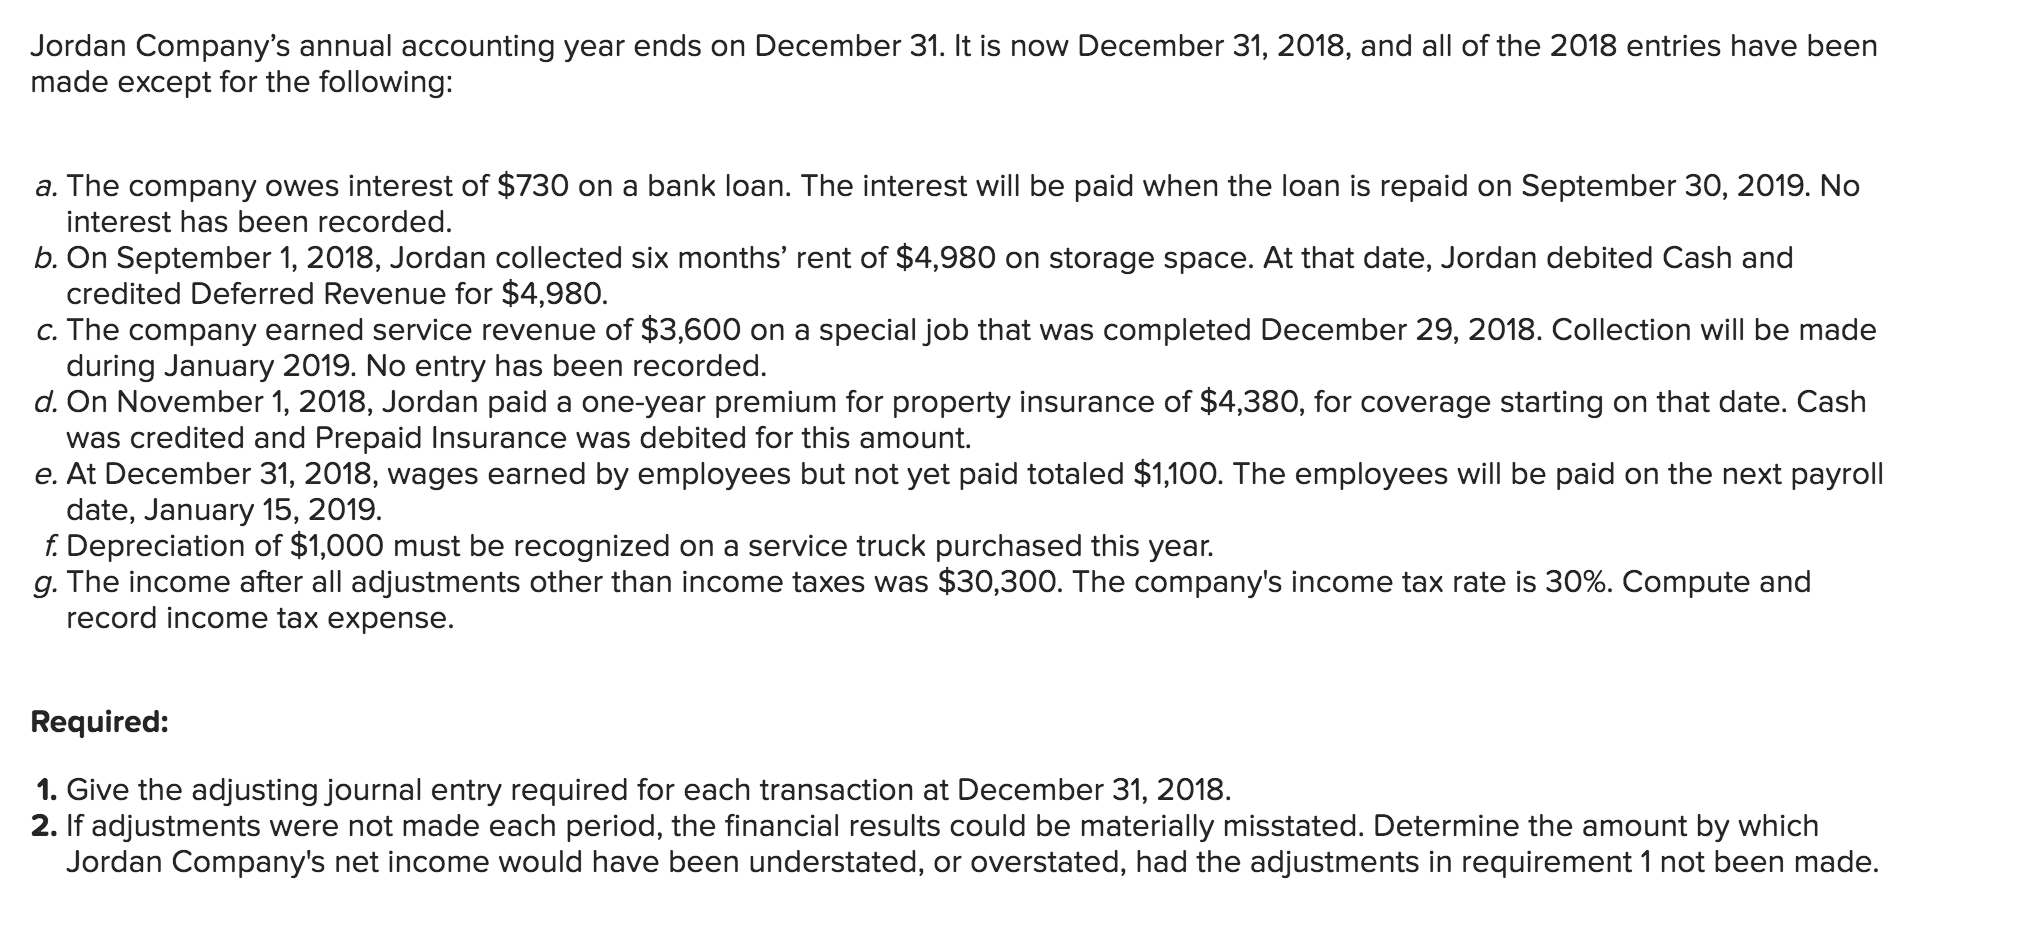 Jordan Company's annual accounting year ends on December 31. It is now December 31, 2018, and all of the 2018 entries have been
made except for the following:
a. The company owes interest of $730 on a bank loan. The interest will be paid when the loan is repaid on September 30, 2019. No
interest has been recorded.
b. On September 1, 2018, Jordan collected six months' rent of $4,980 on storage space. At that date, Jordan debited Cash and
credited Deferred Revenue for $4,980.
c. The company earned service revenue of $3,600 on a special job that was completed December 29, 2018. Collection will be made
during January 2019. No entry has been recorded.
d. On November 1, 2018, Jordan paid a one-year premium for property insurance of $4,380, for coverage starting on that date. Cash
was credited and Prepaid Insurance was debited for this amount.
e. At December 31, 2018, wages earned by employees but not yet paid totaled $1,100. The employees will be paid on the next payroll
date, January 15, 2019.
f. Depreciation of $1,000 must be recognized on a service truck purchased this year.
g. The income after all adjustments other than income taxes was $30,300. The company's income tax rate is 30%. Compute and
record income tax expense.
Required:
1. Give the adjusting journal entry required for each transaction at December 31, 2018.
2. If adjustments were not made each period, the financial results could be materially misstated. Determine the amount by which
Jordan Company's net income would have been understated, or overstated, had the adjustments in requirement 1 not been made.
